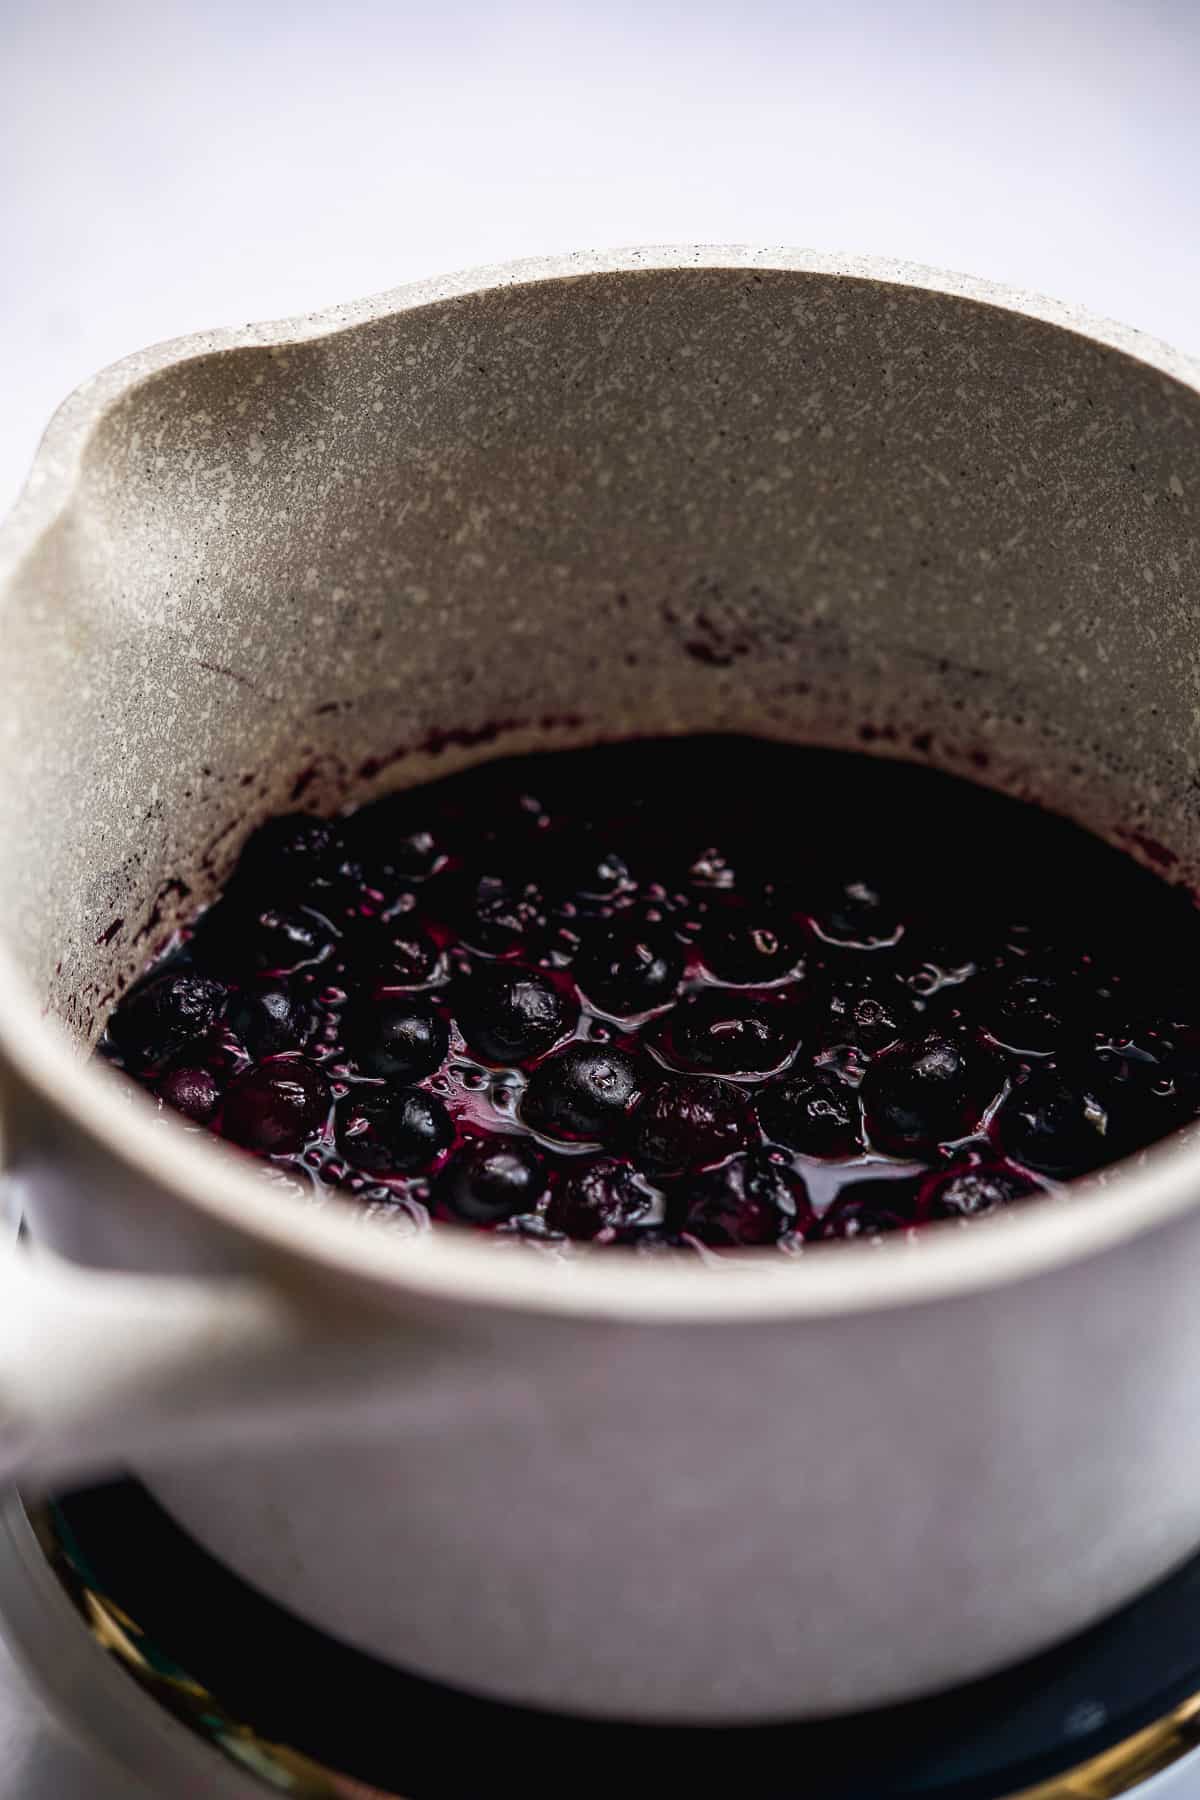 Blueberries cooking in a pot.